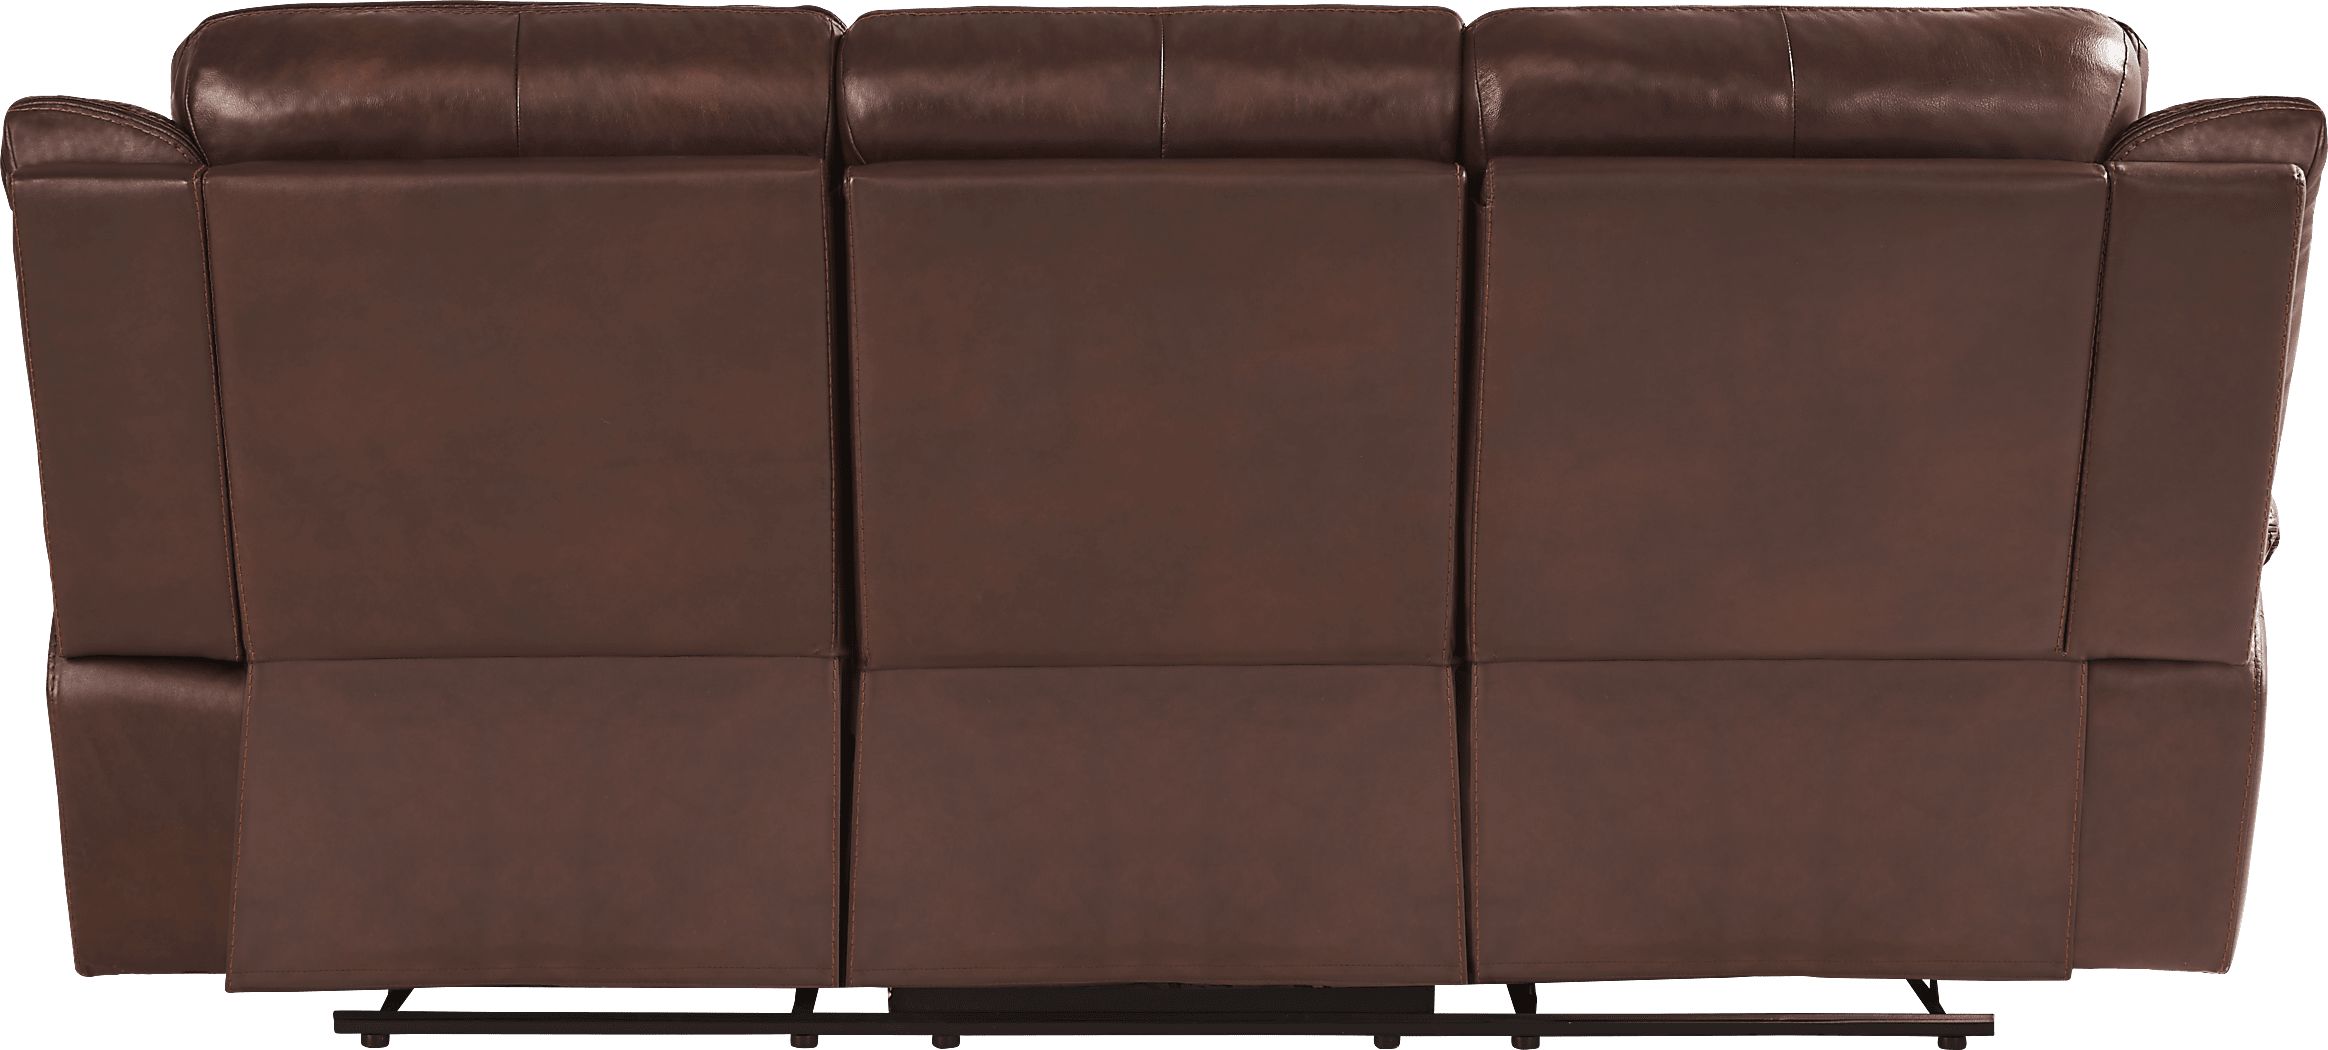 Montefano Brown Leather 8 Pc Living Room with Reclining Sofa